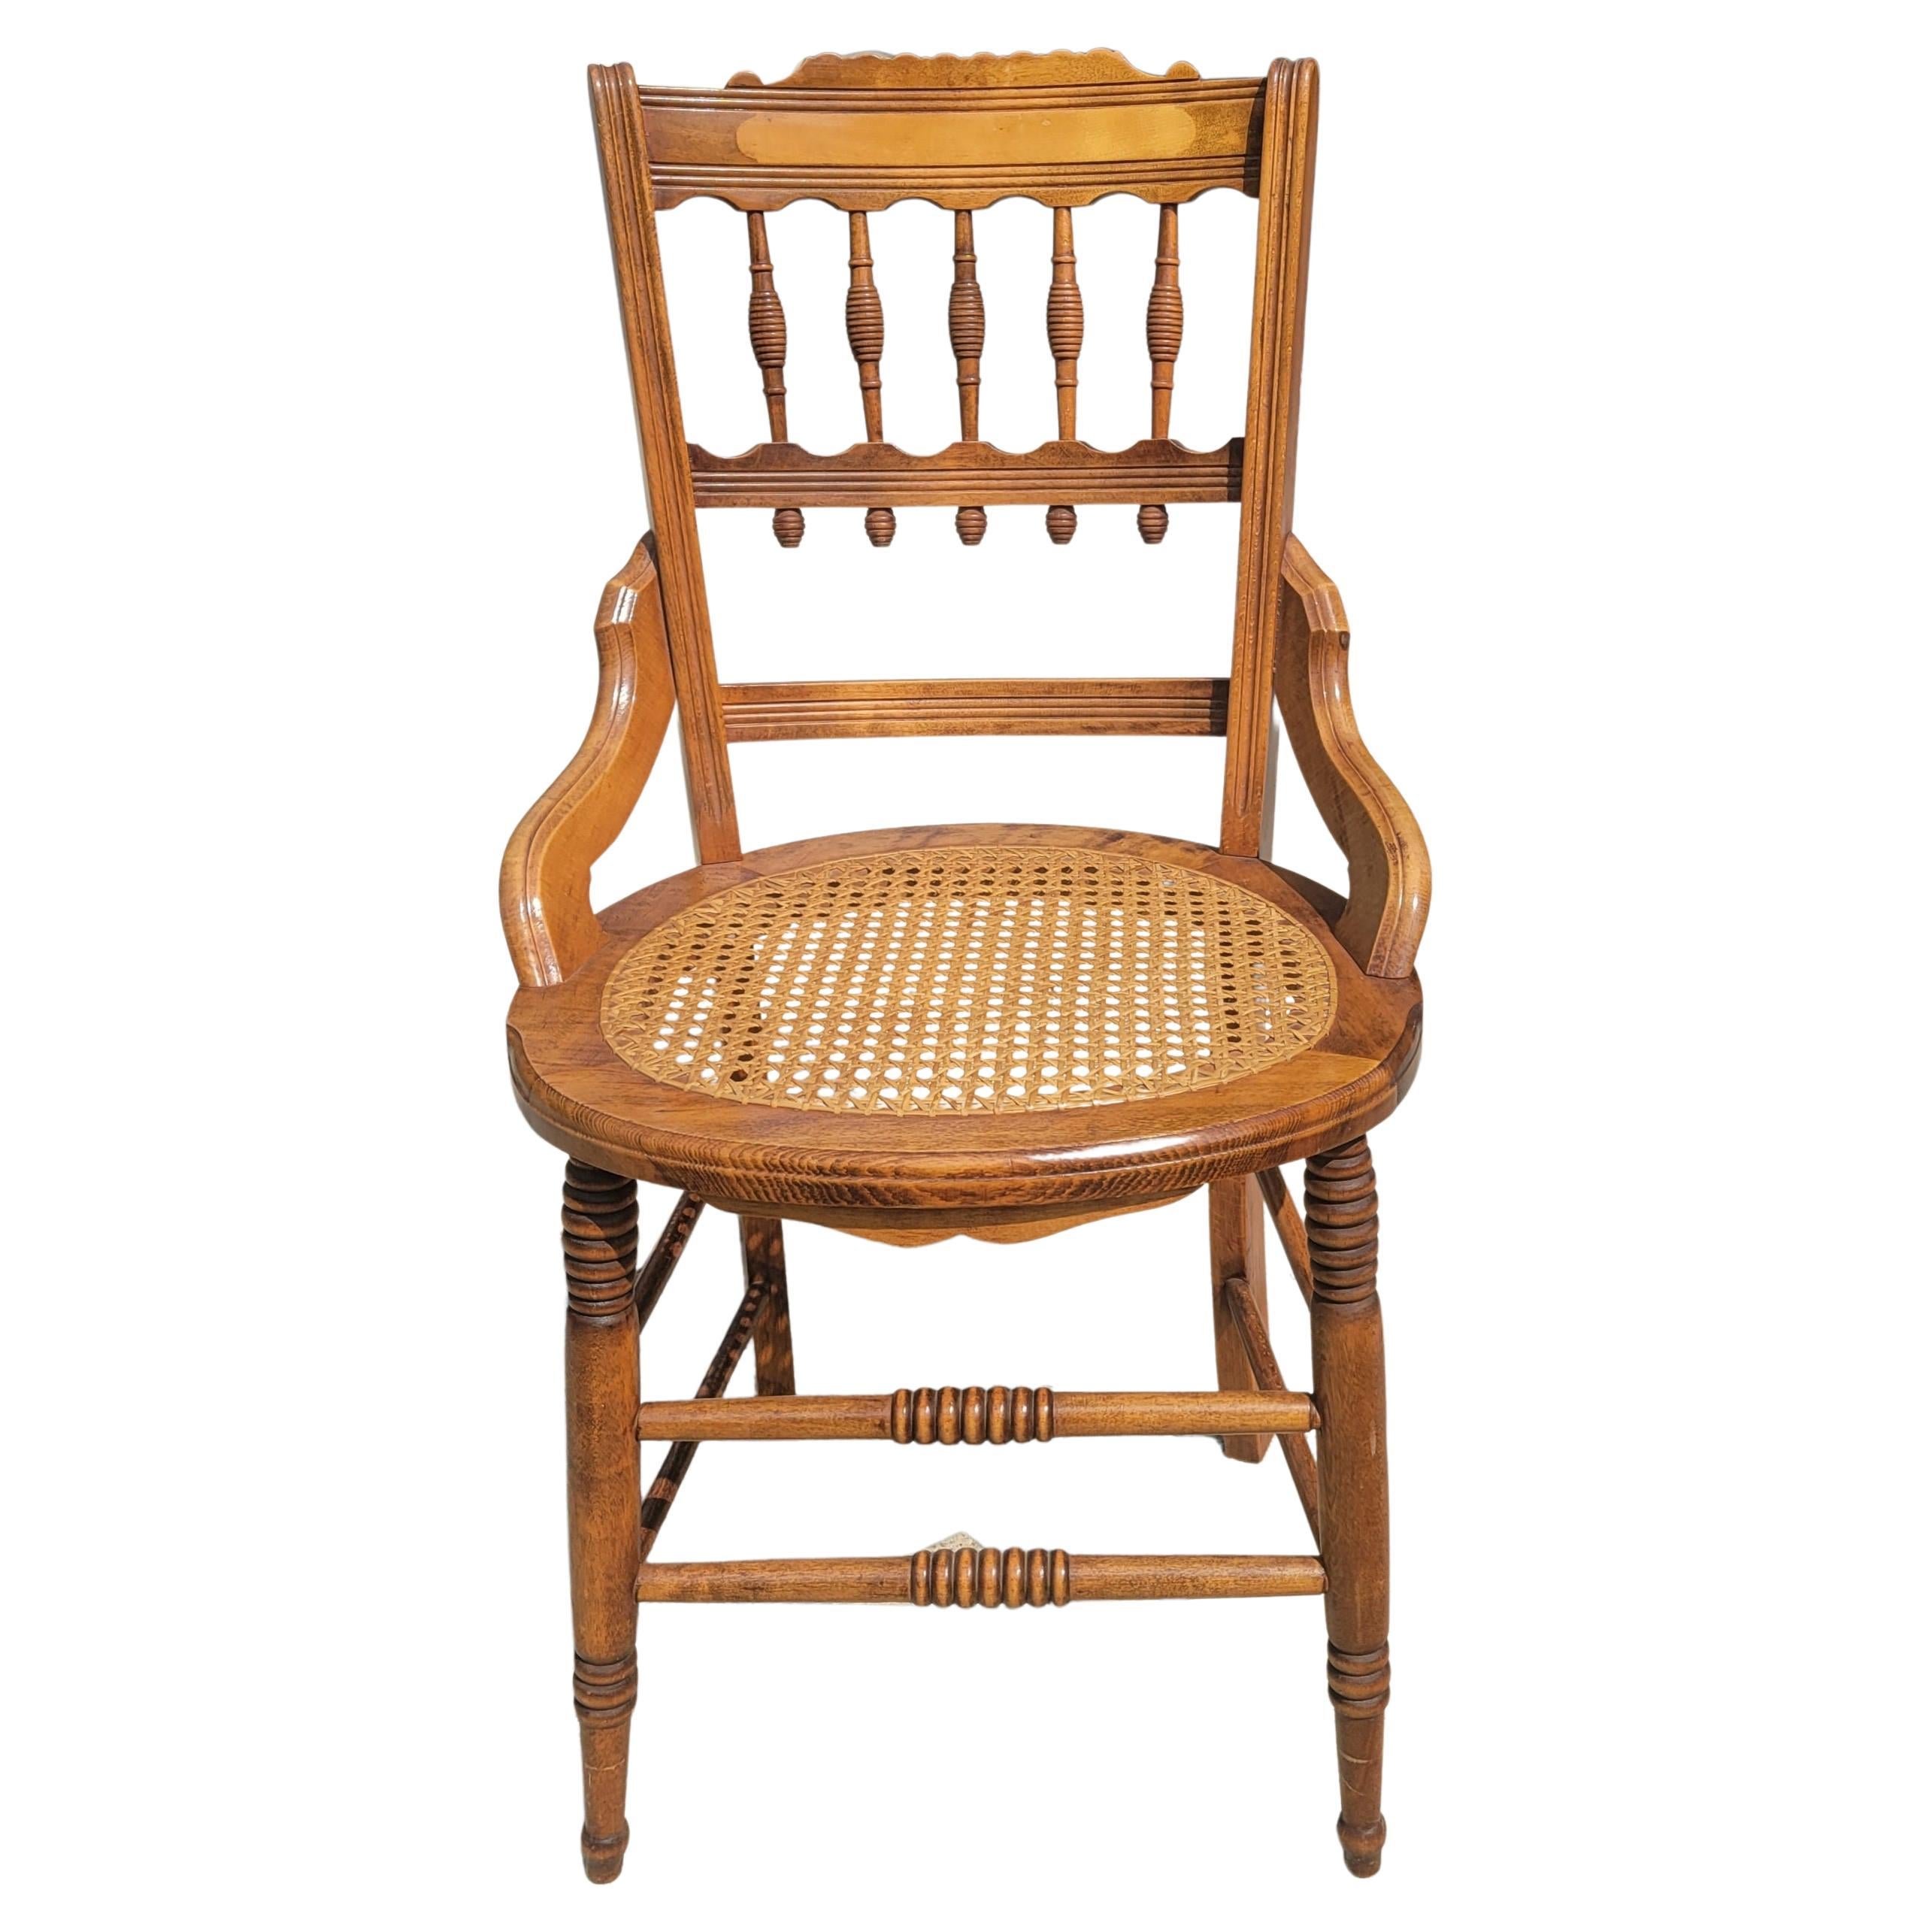 Victorian 19th Century Refinished Carved Walnut & Cane Seat Eastlate Side Chairs, a Pair For Sale